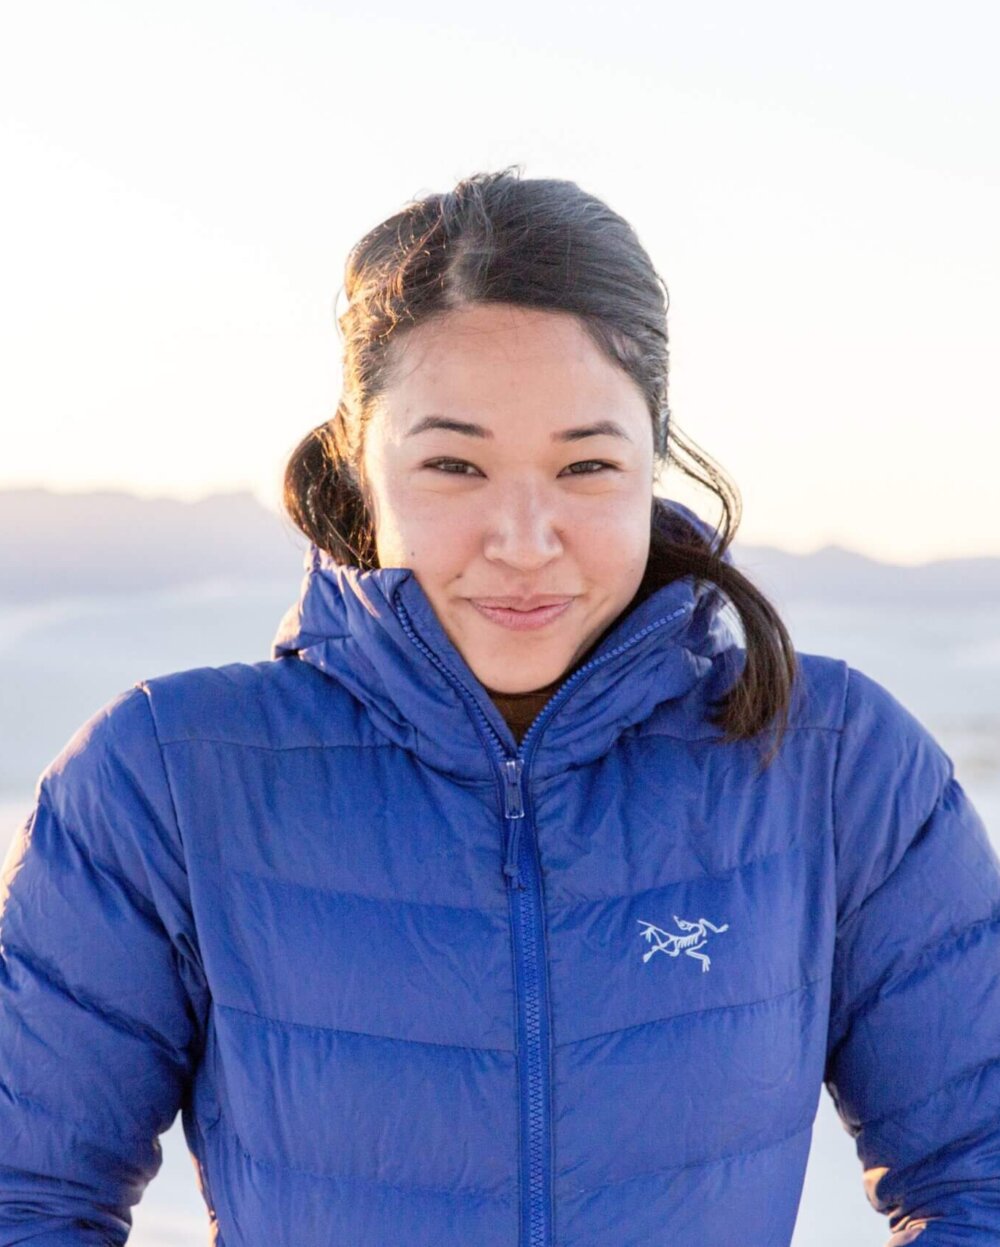 Artist and climber michelle ang